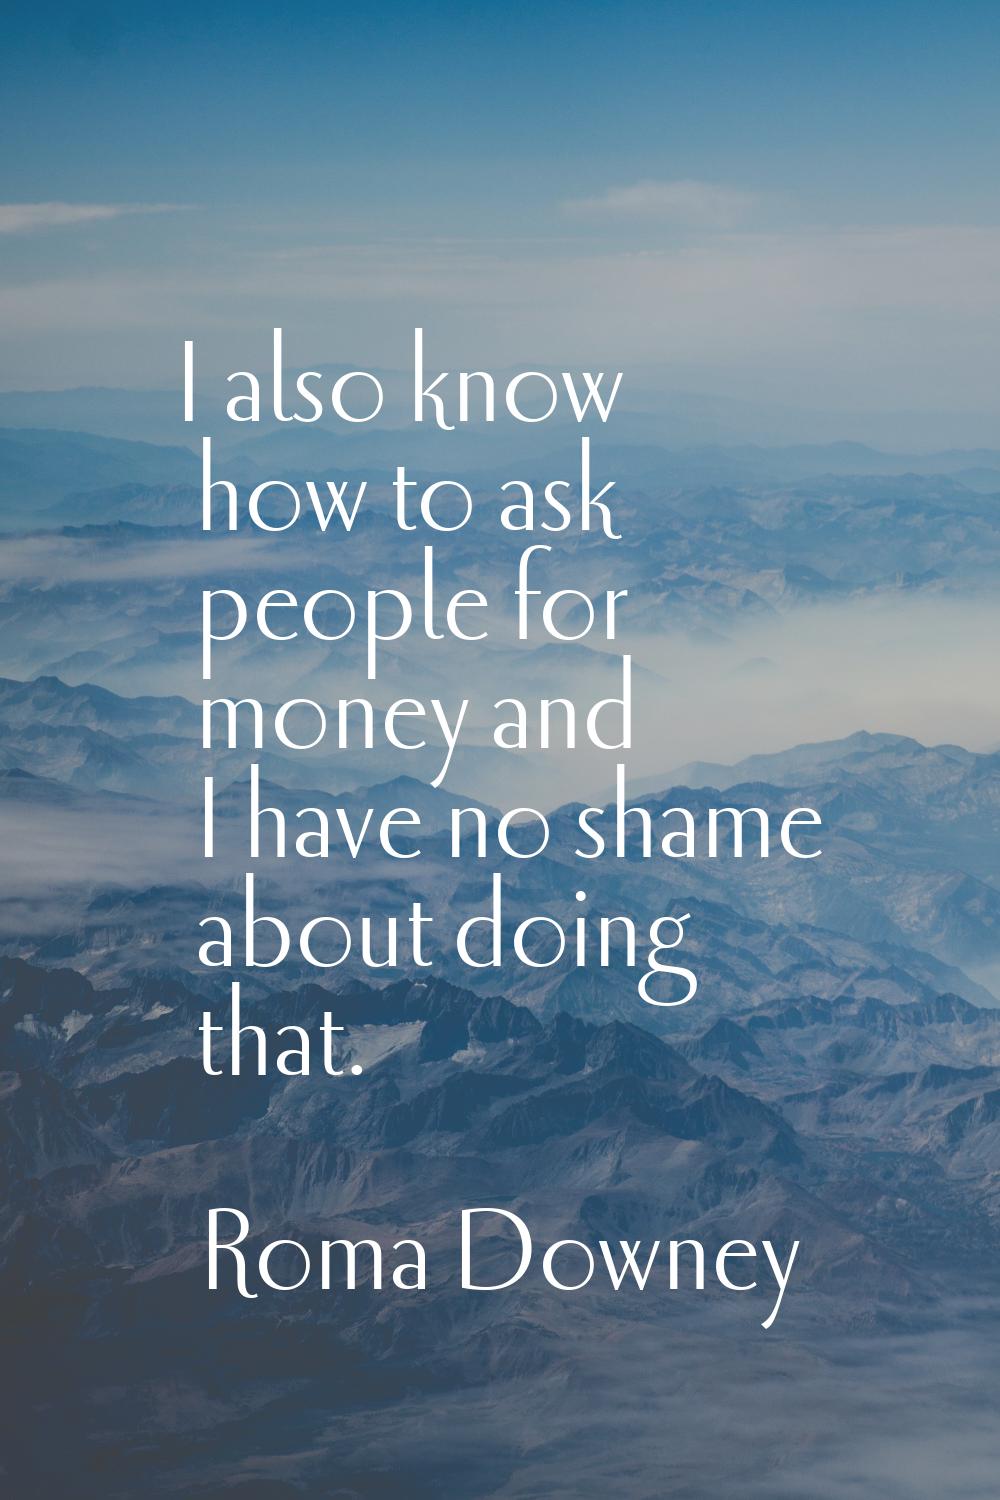 I also know how to ask people for money and I have no shame about doing that.